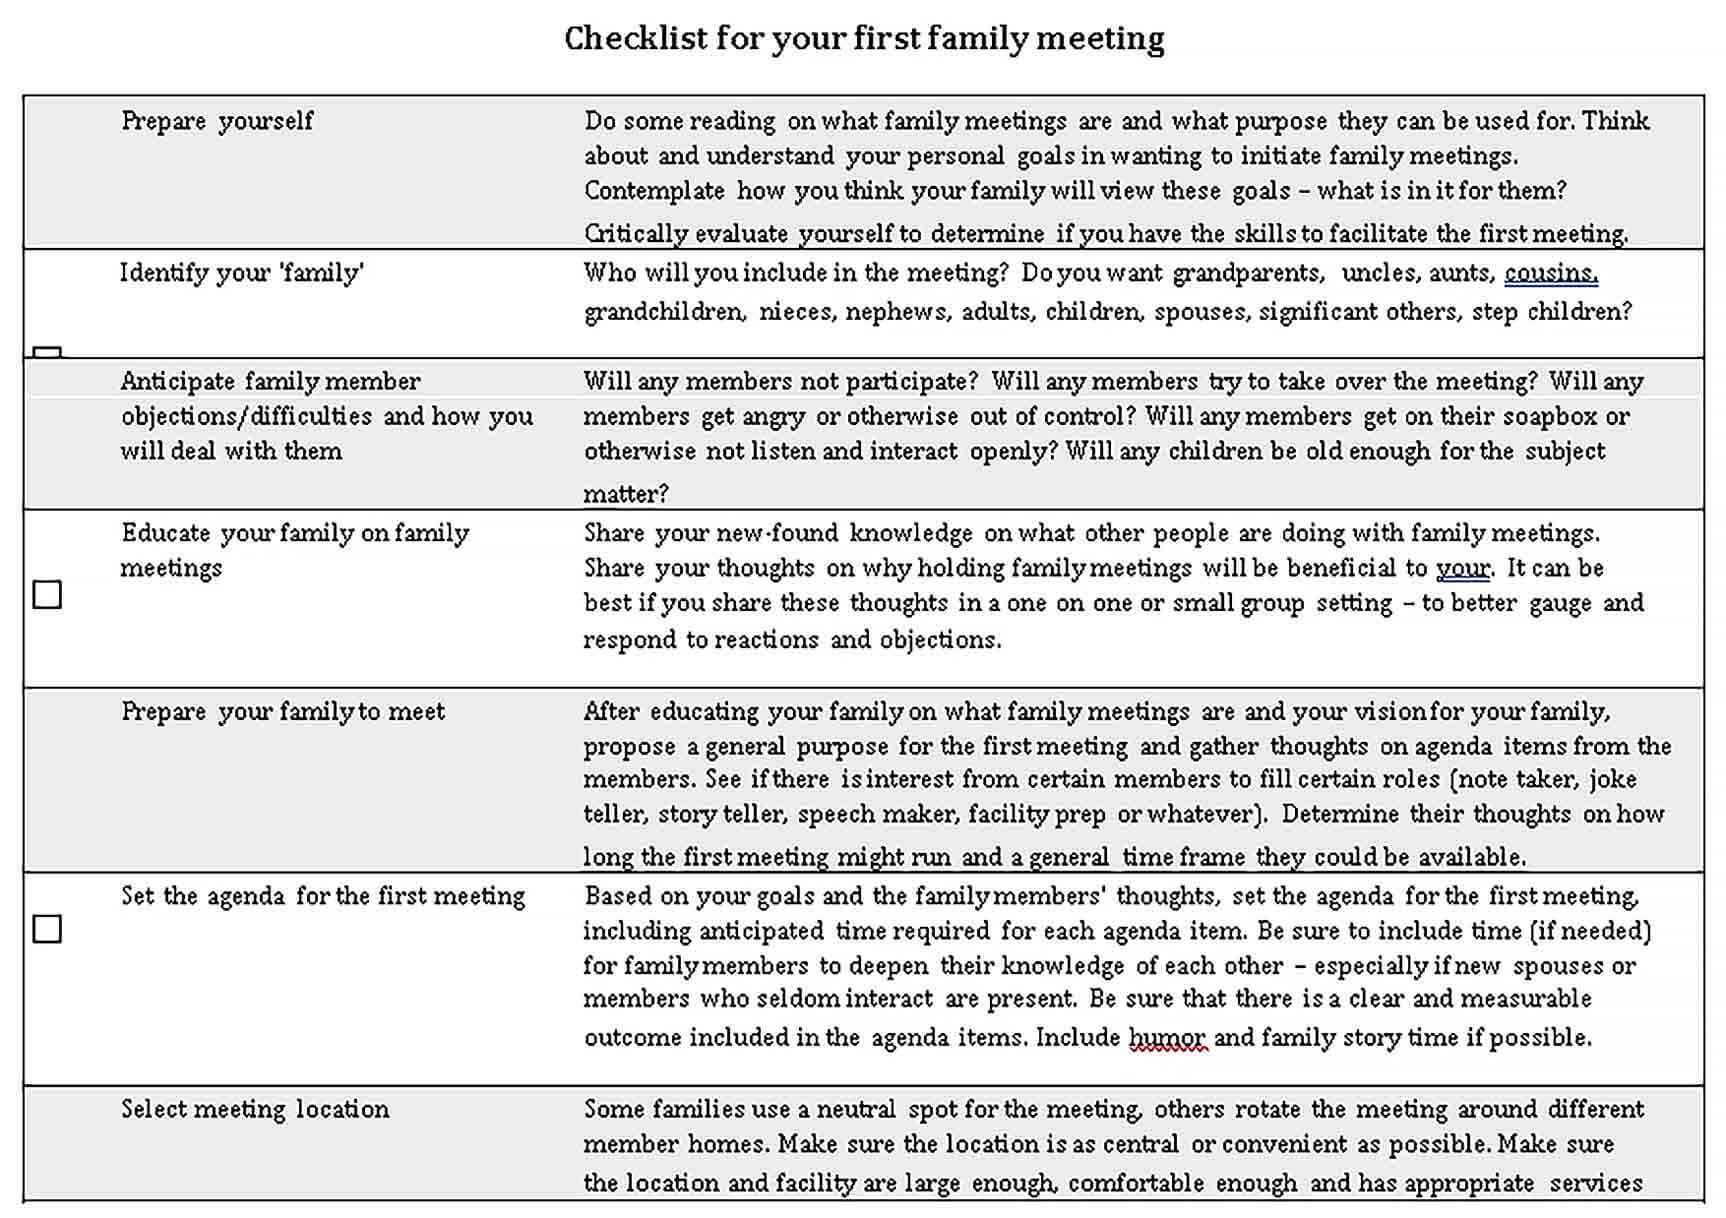 Sample Family Meeting Checklist Template 1